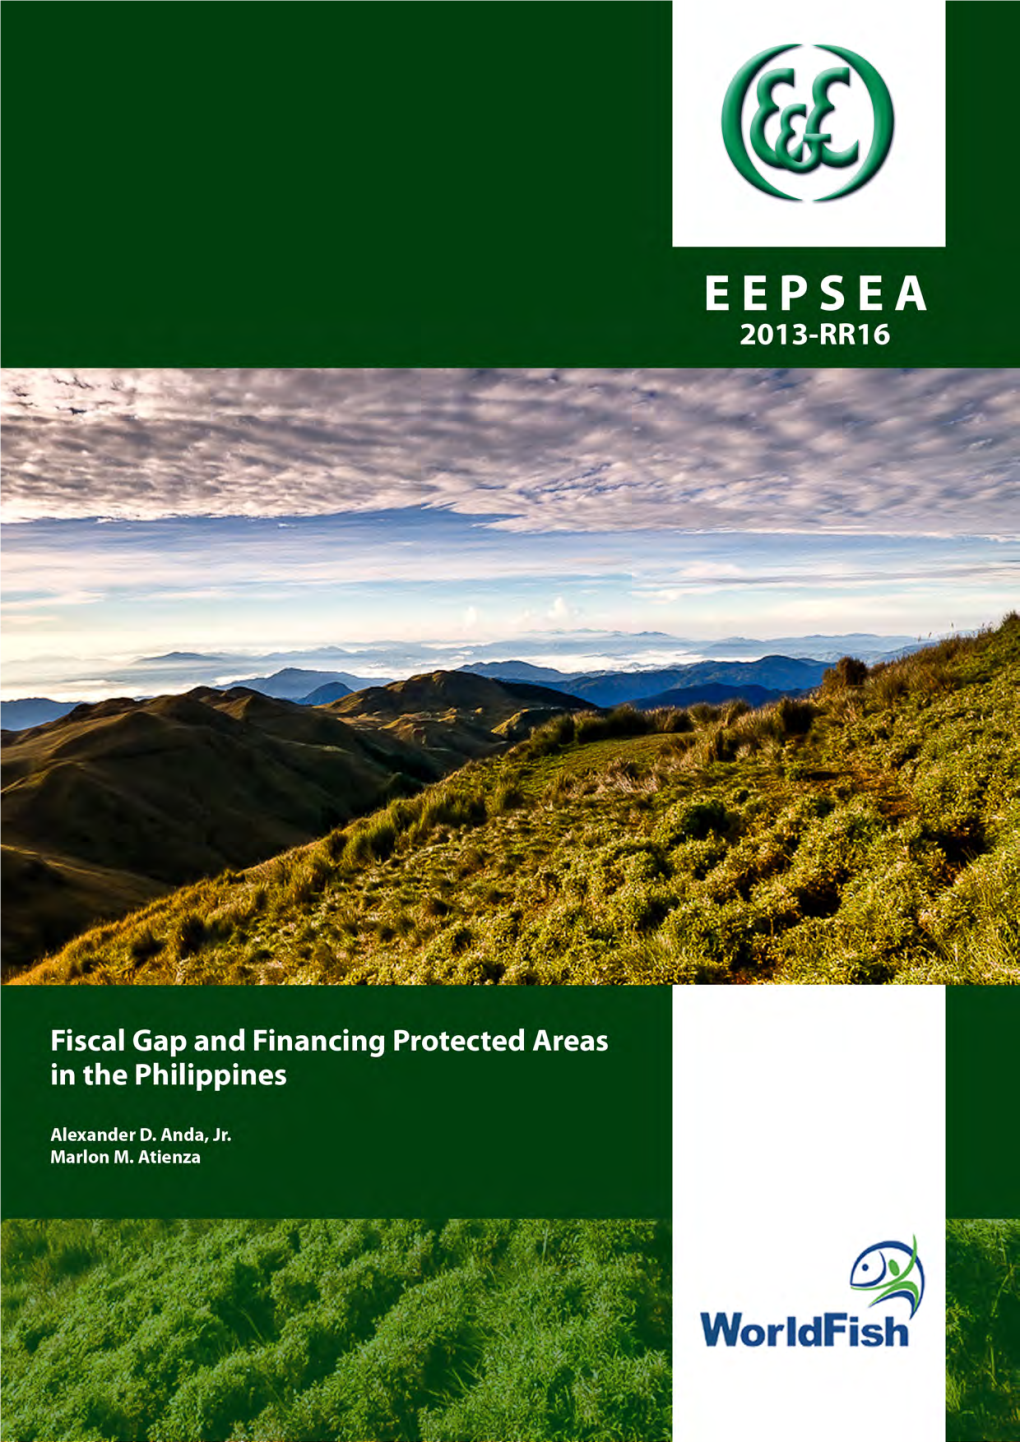 Fiscal Gap and Financing Protected Areas in the Philippines